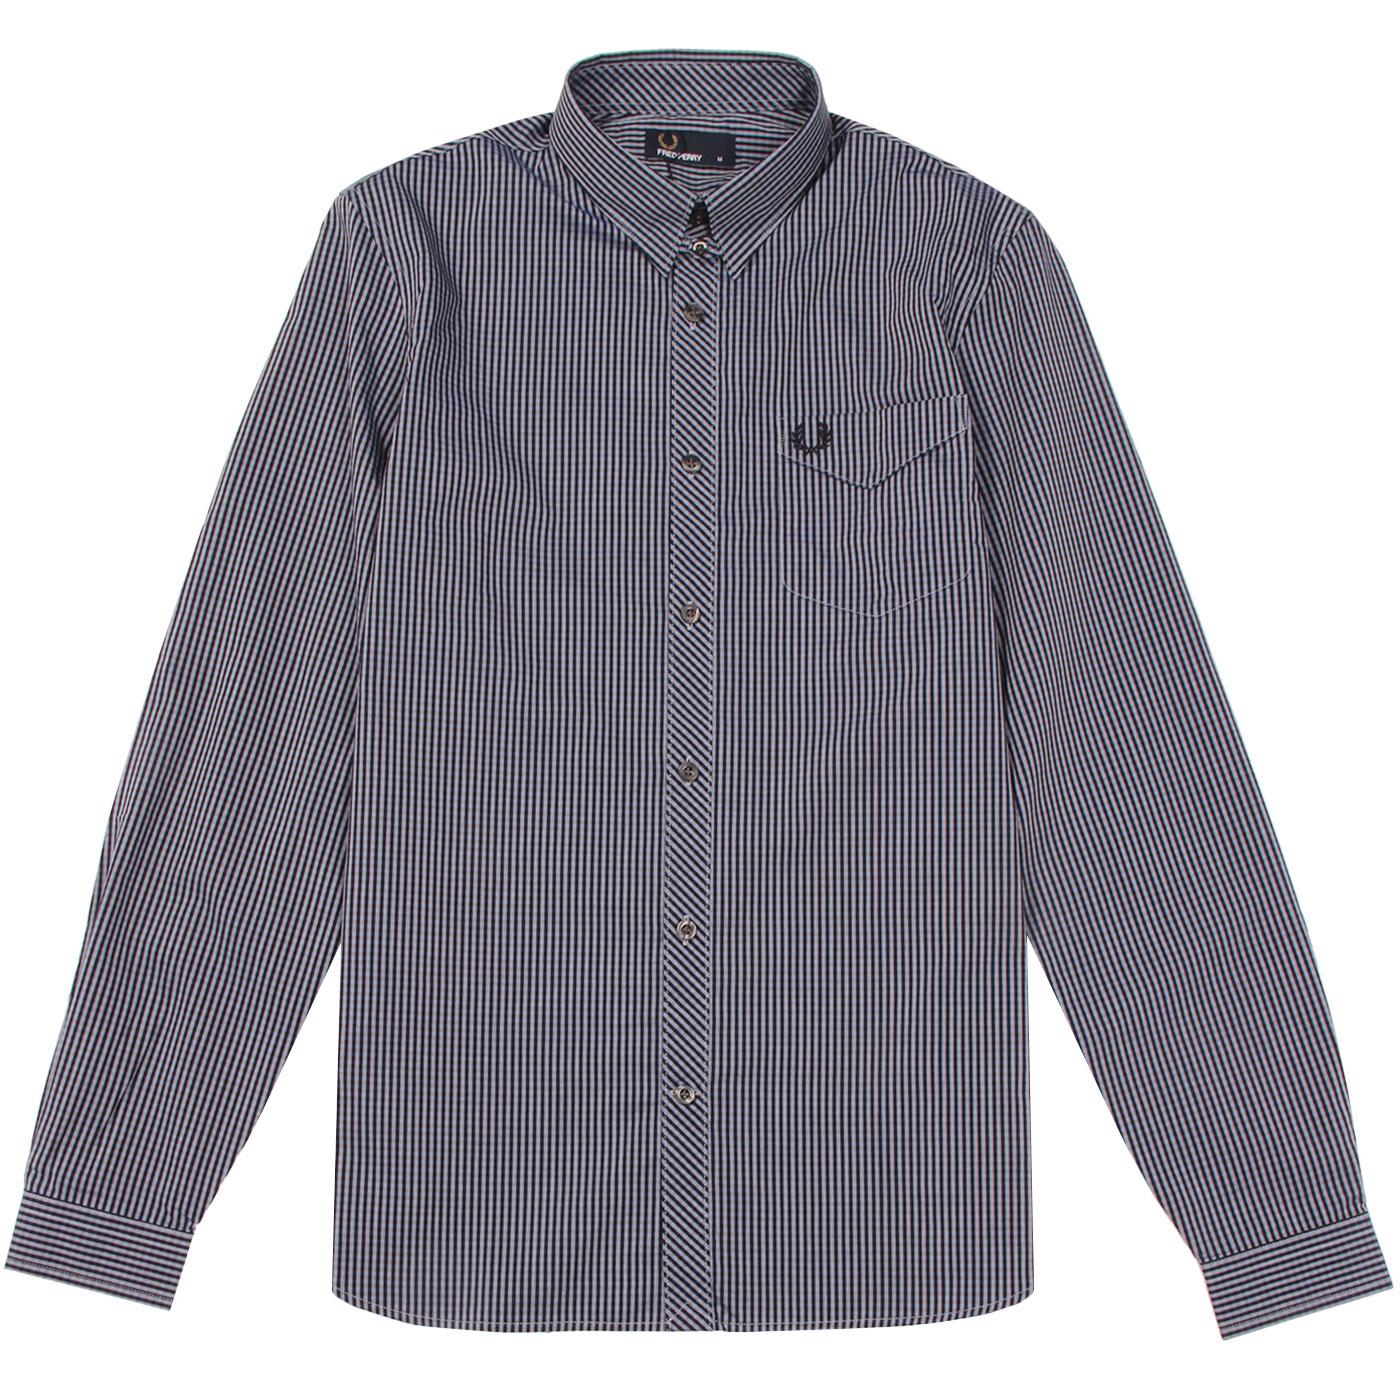 FRED PERRY Men's Retro Tonic Gingham Check Shirt in Royal